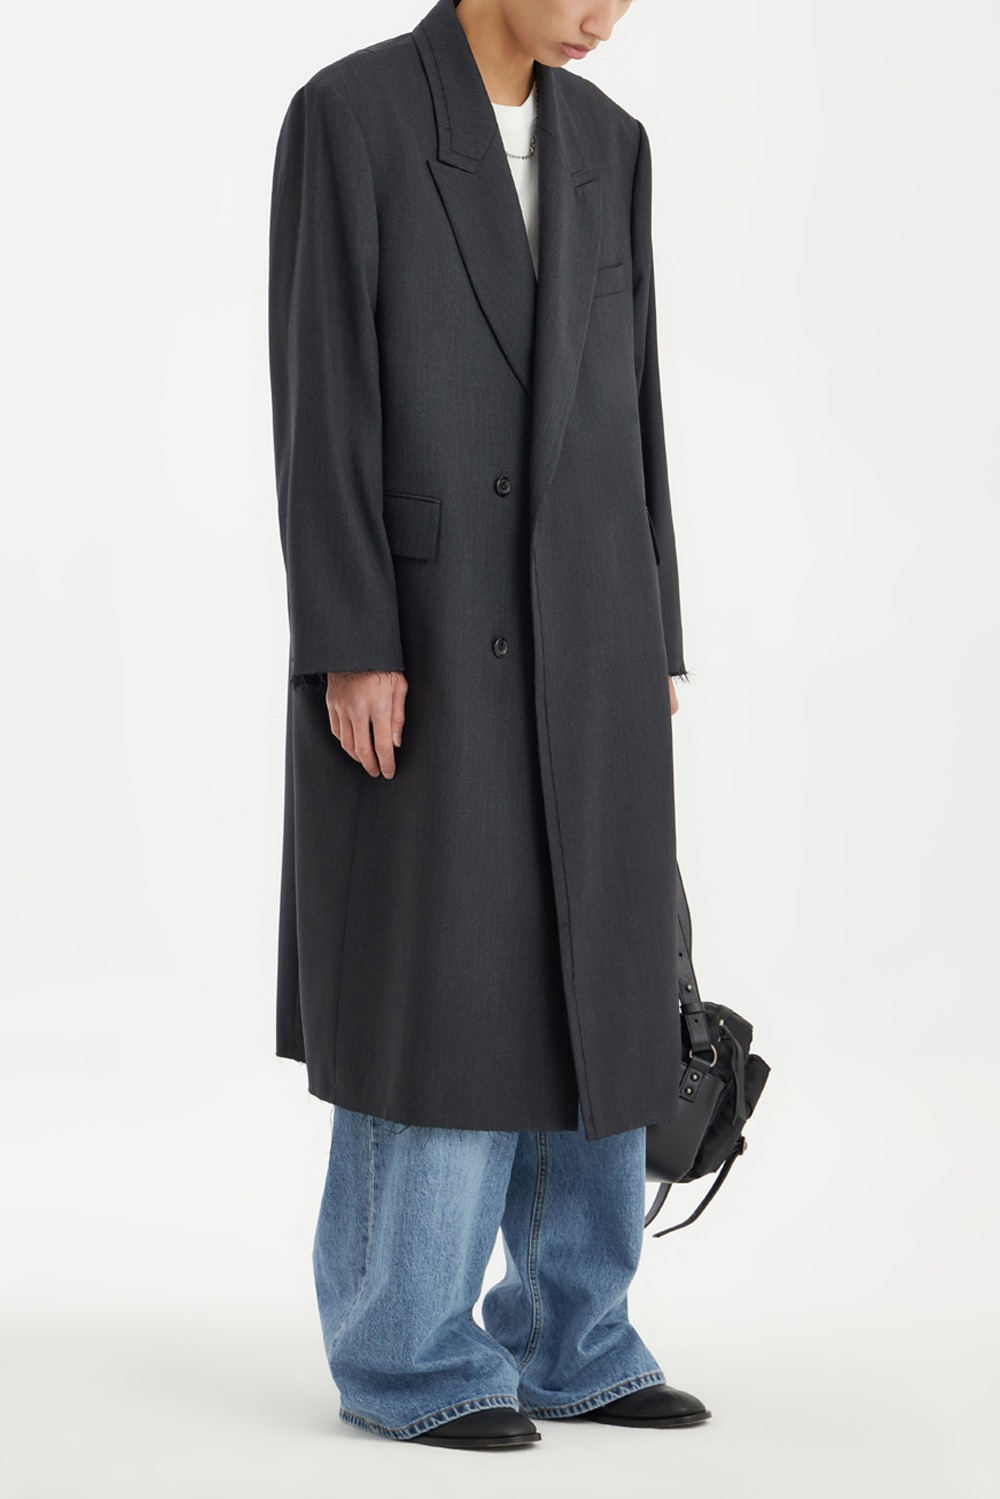 Oversized Double Breasted Coat-Charcoal Grey